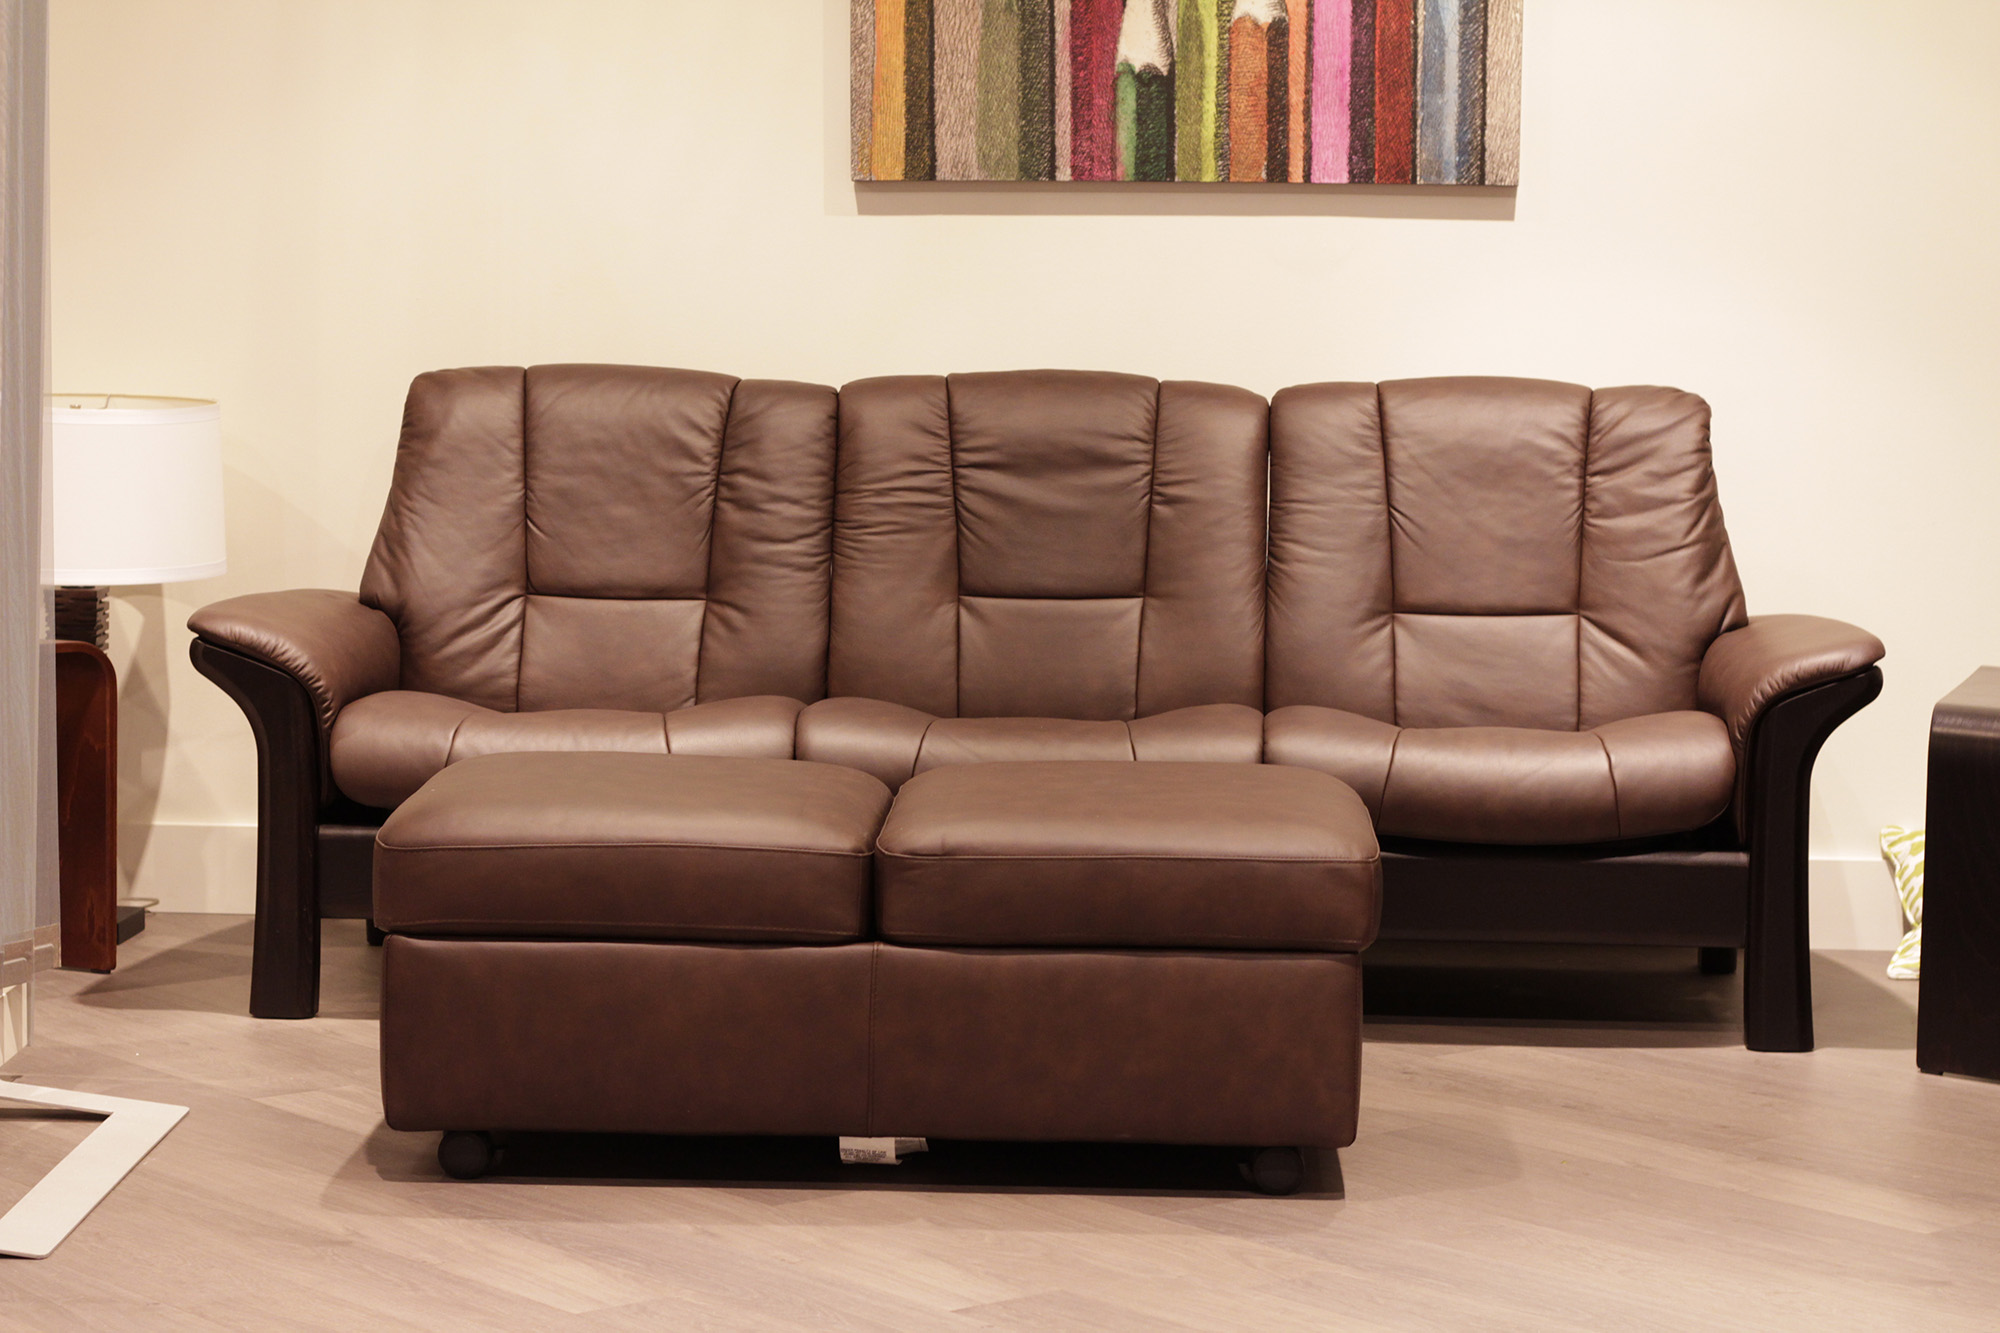 stressless sapphire leather reclining low back sofa